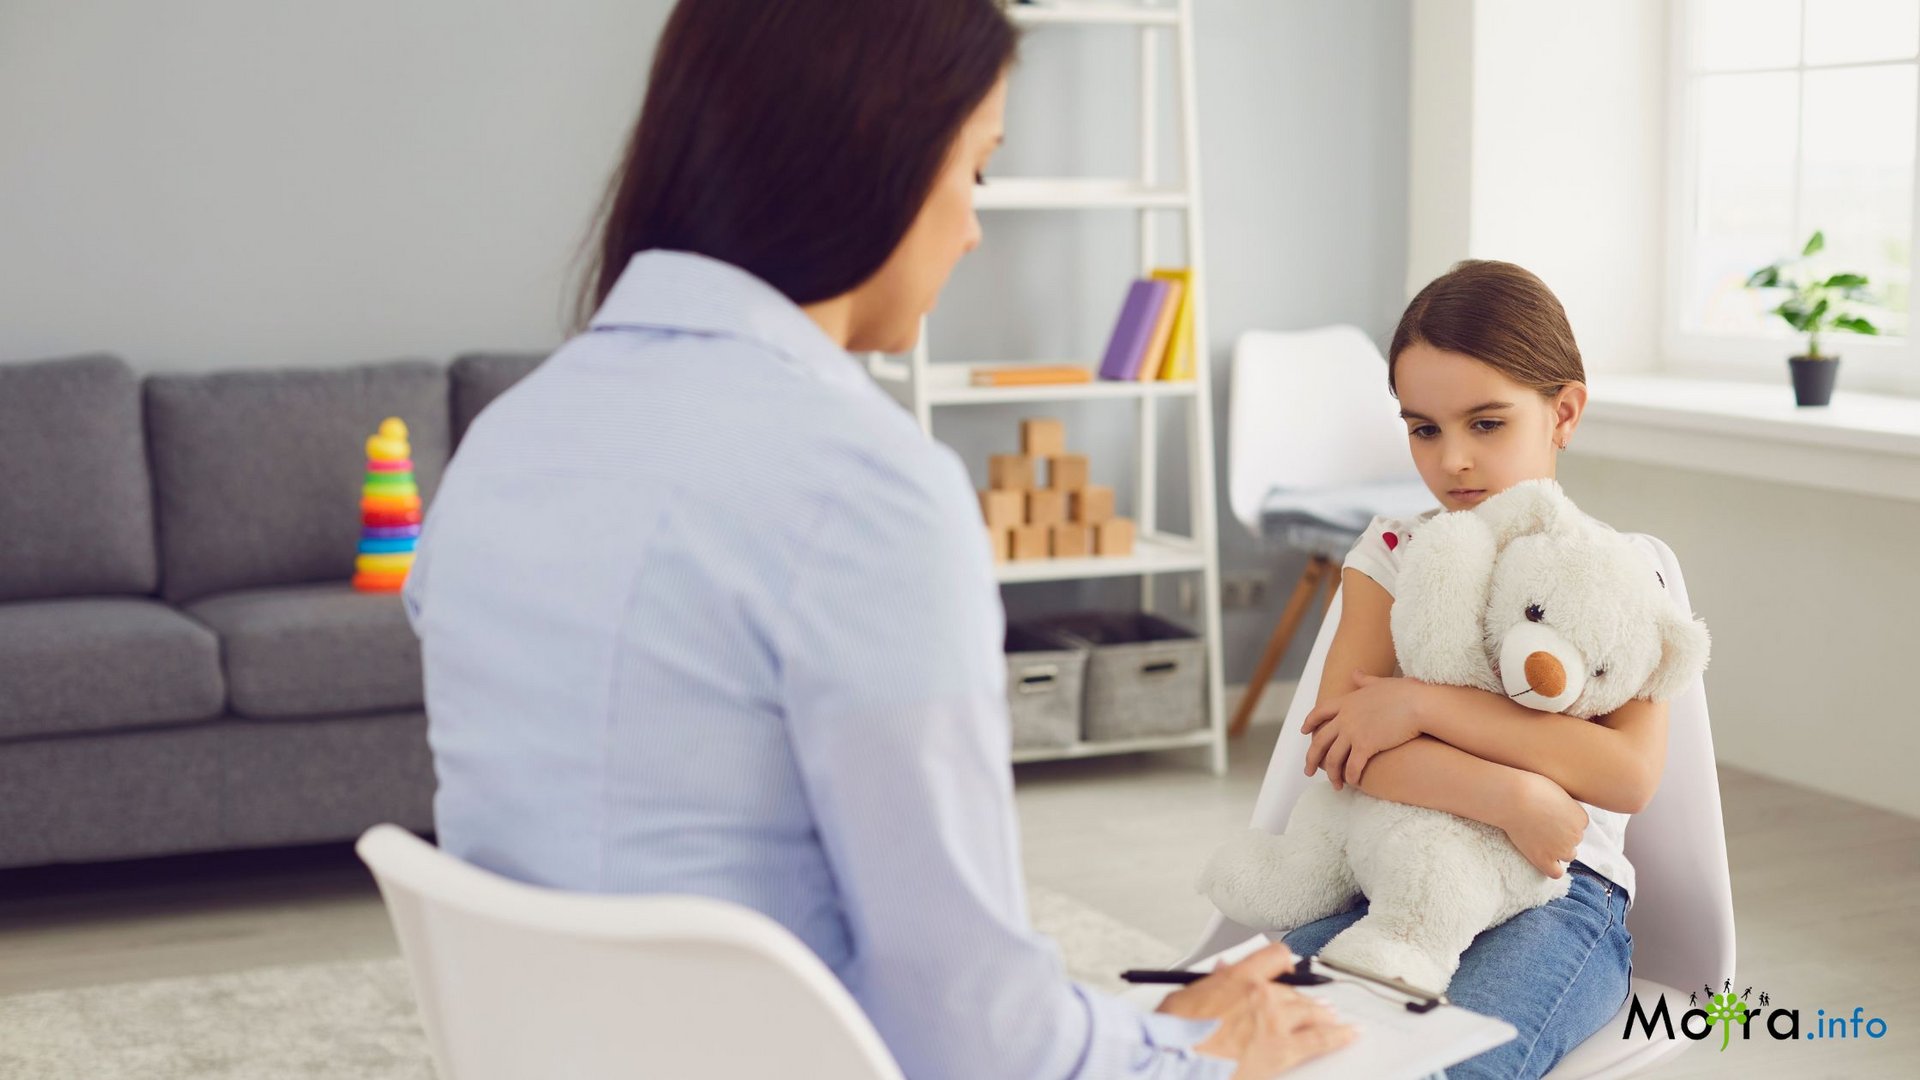 How does a consultation with a child psychologist look like?